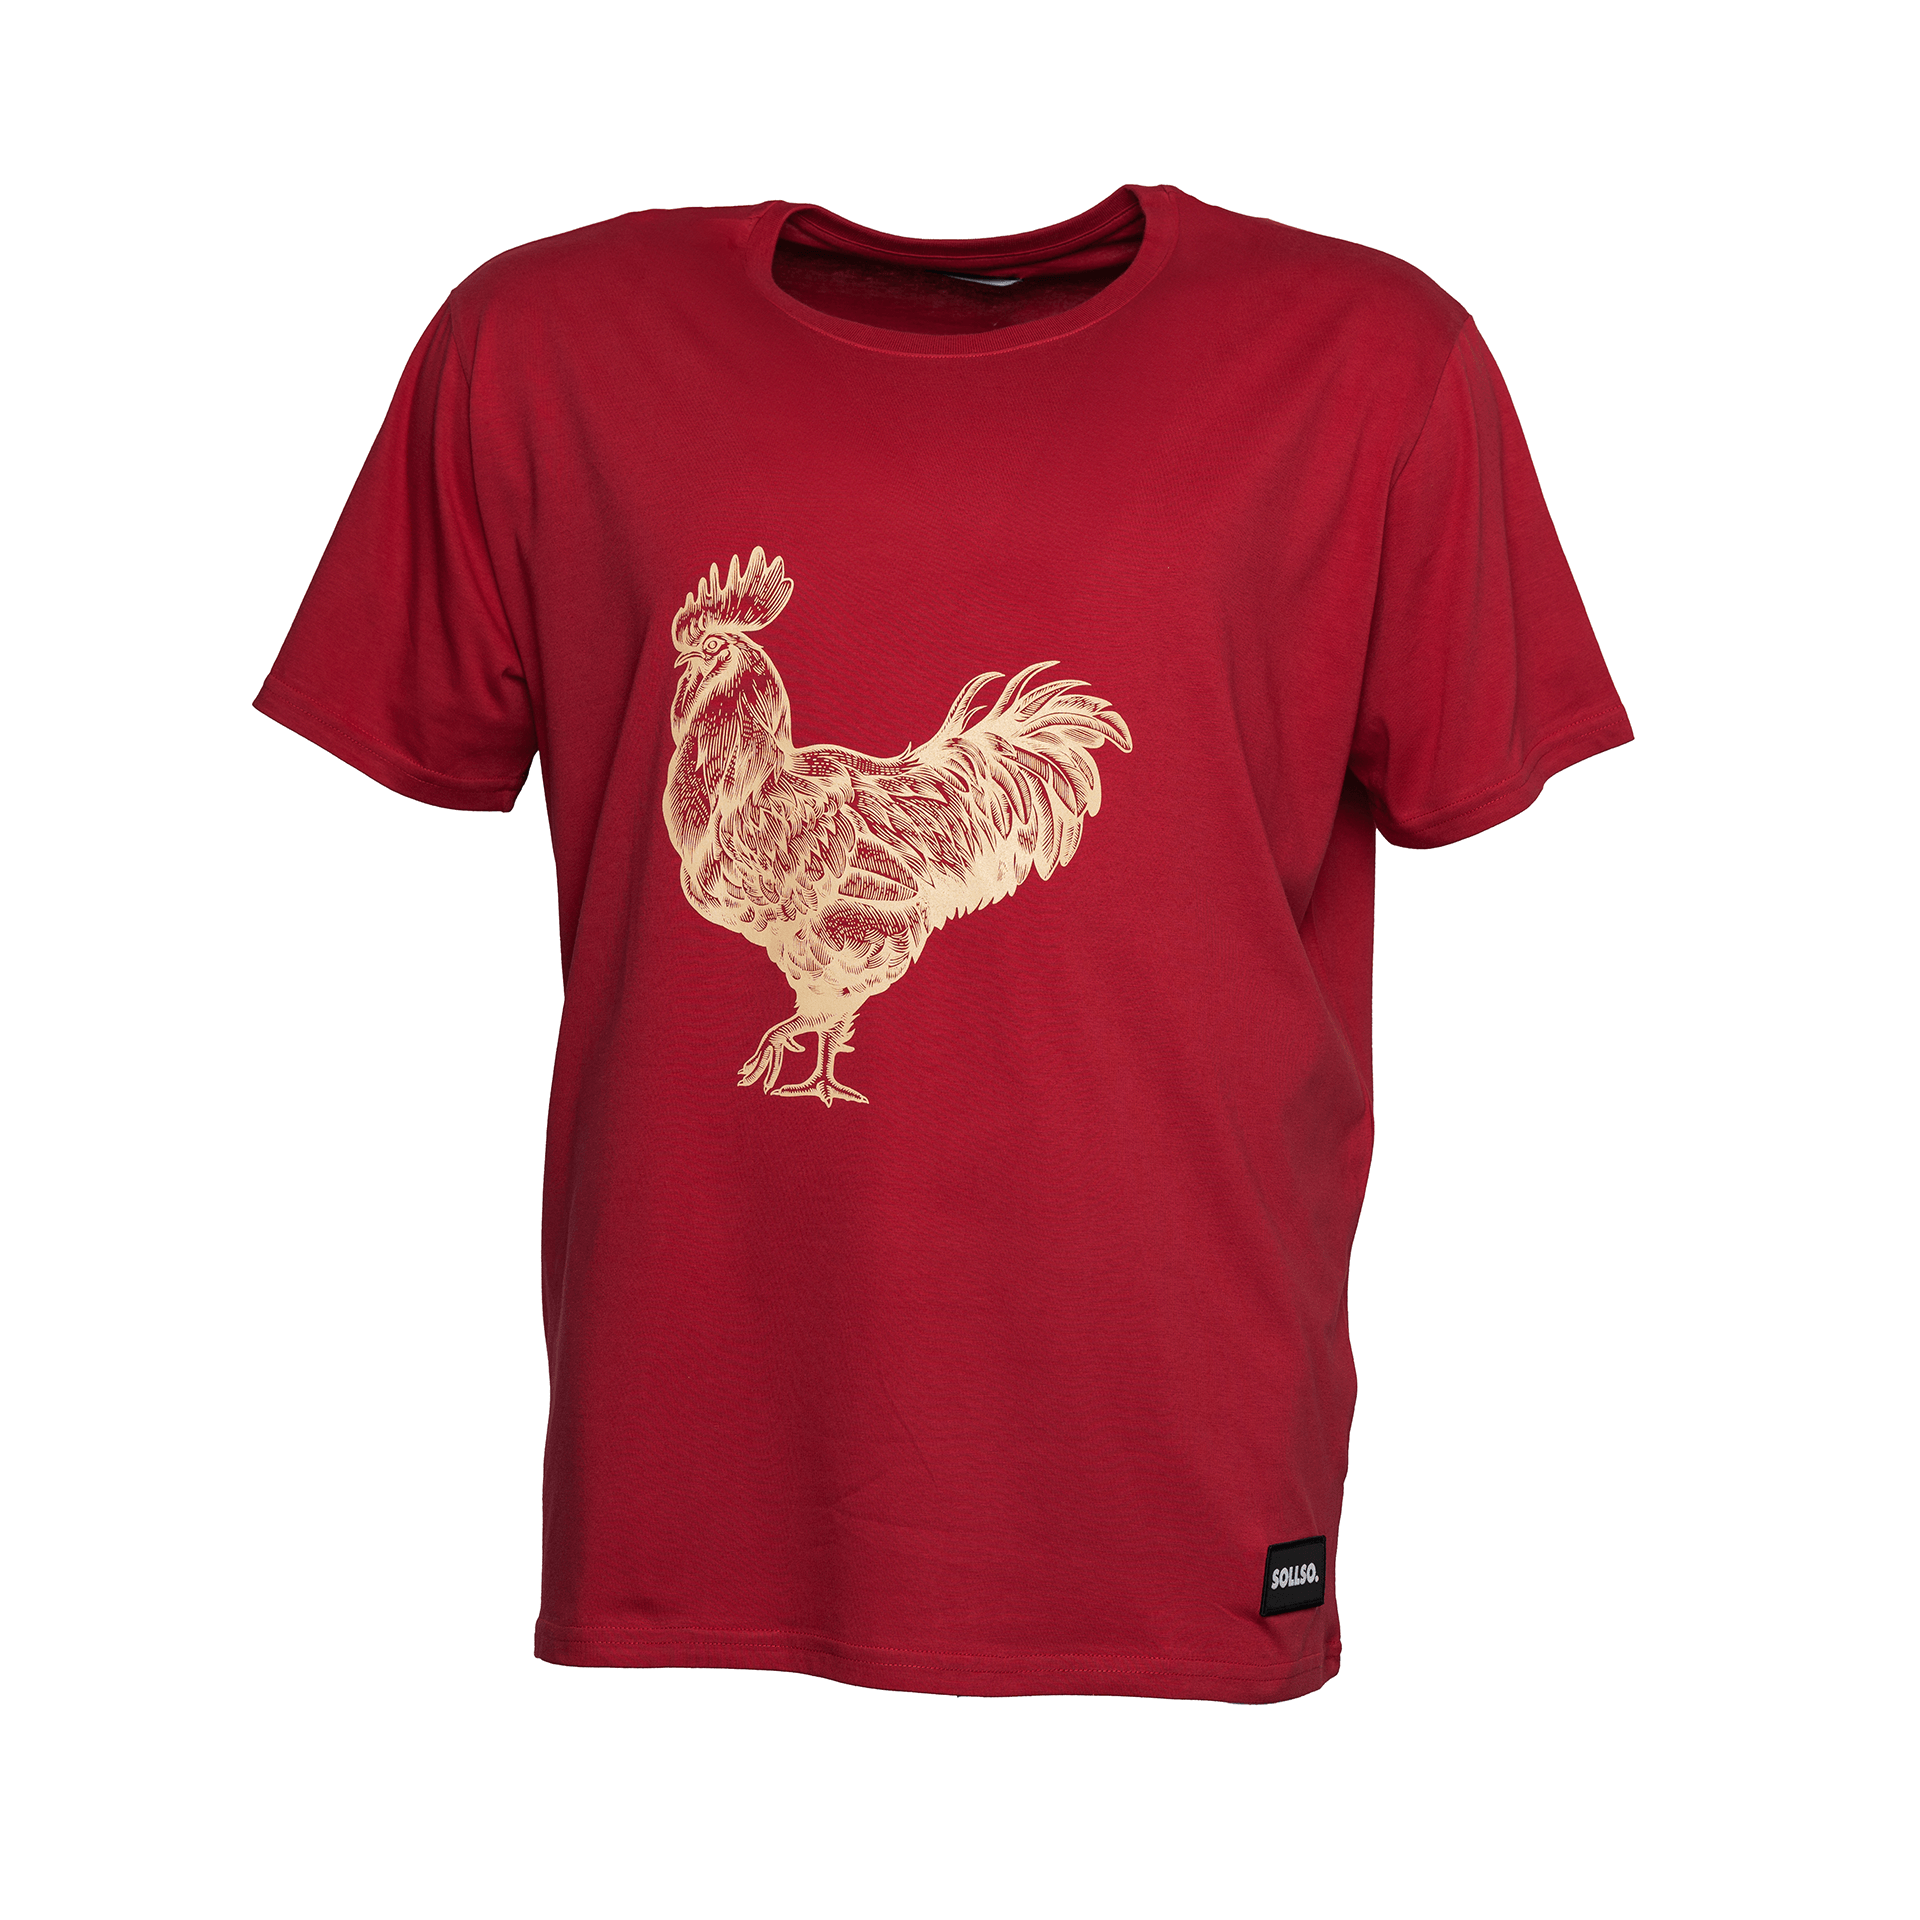 SOLLSO. T-Shirt "Rooster", Farbe Ginger Red, Größe XXL